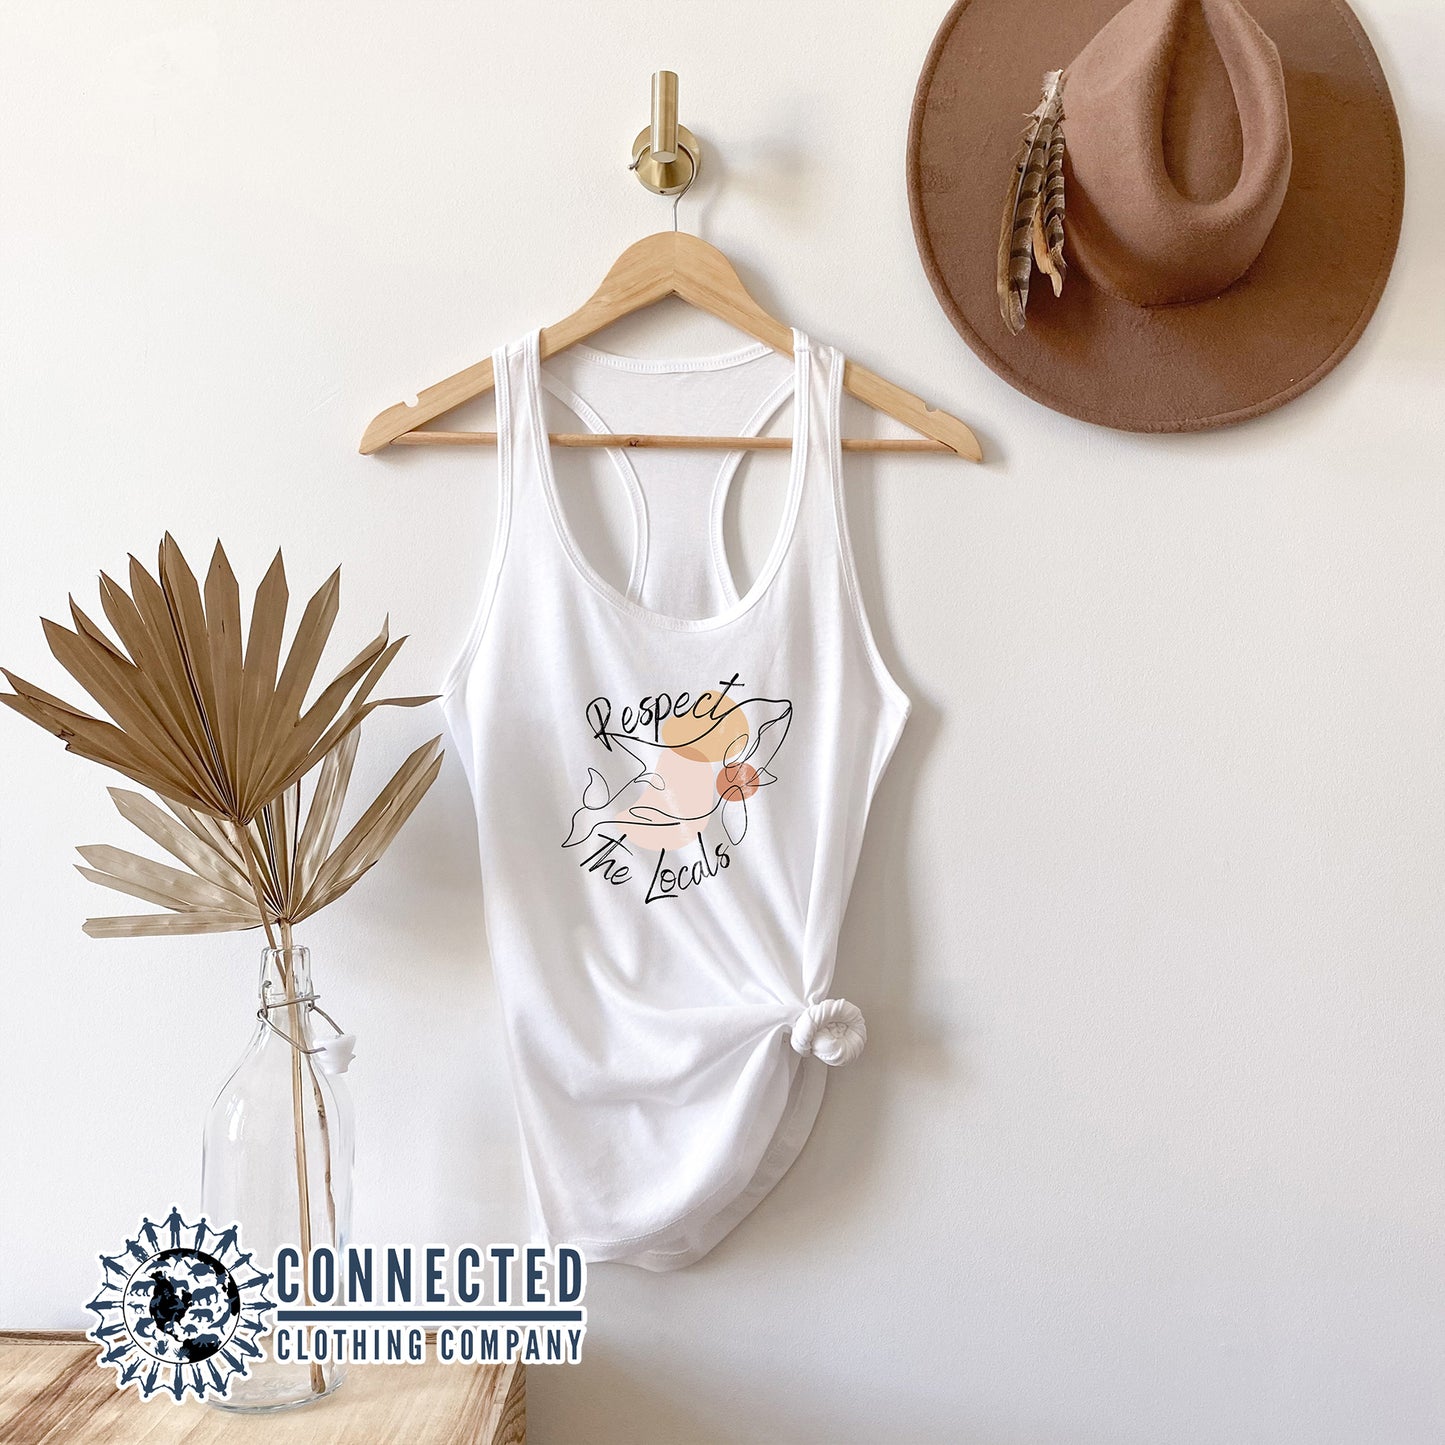 White Respect The Locals Orca Women's Tank Top - Connected Clothing Company - Ethically and Sustainably Made - 10% of profits donated to Wild Orca killer whale conservation